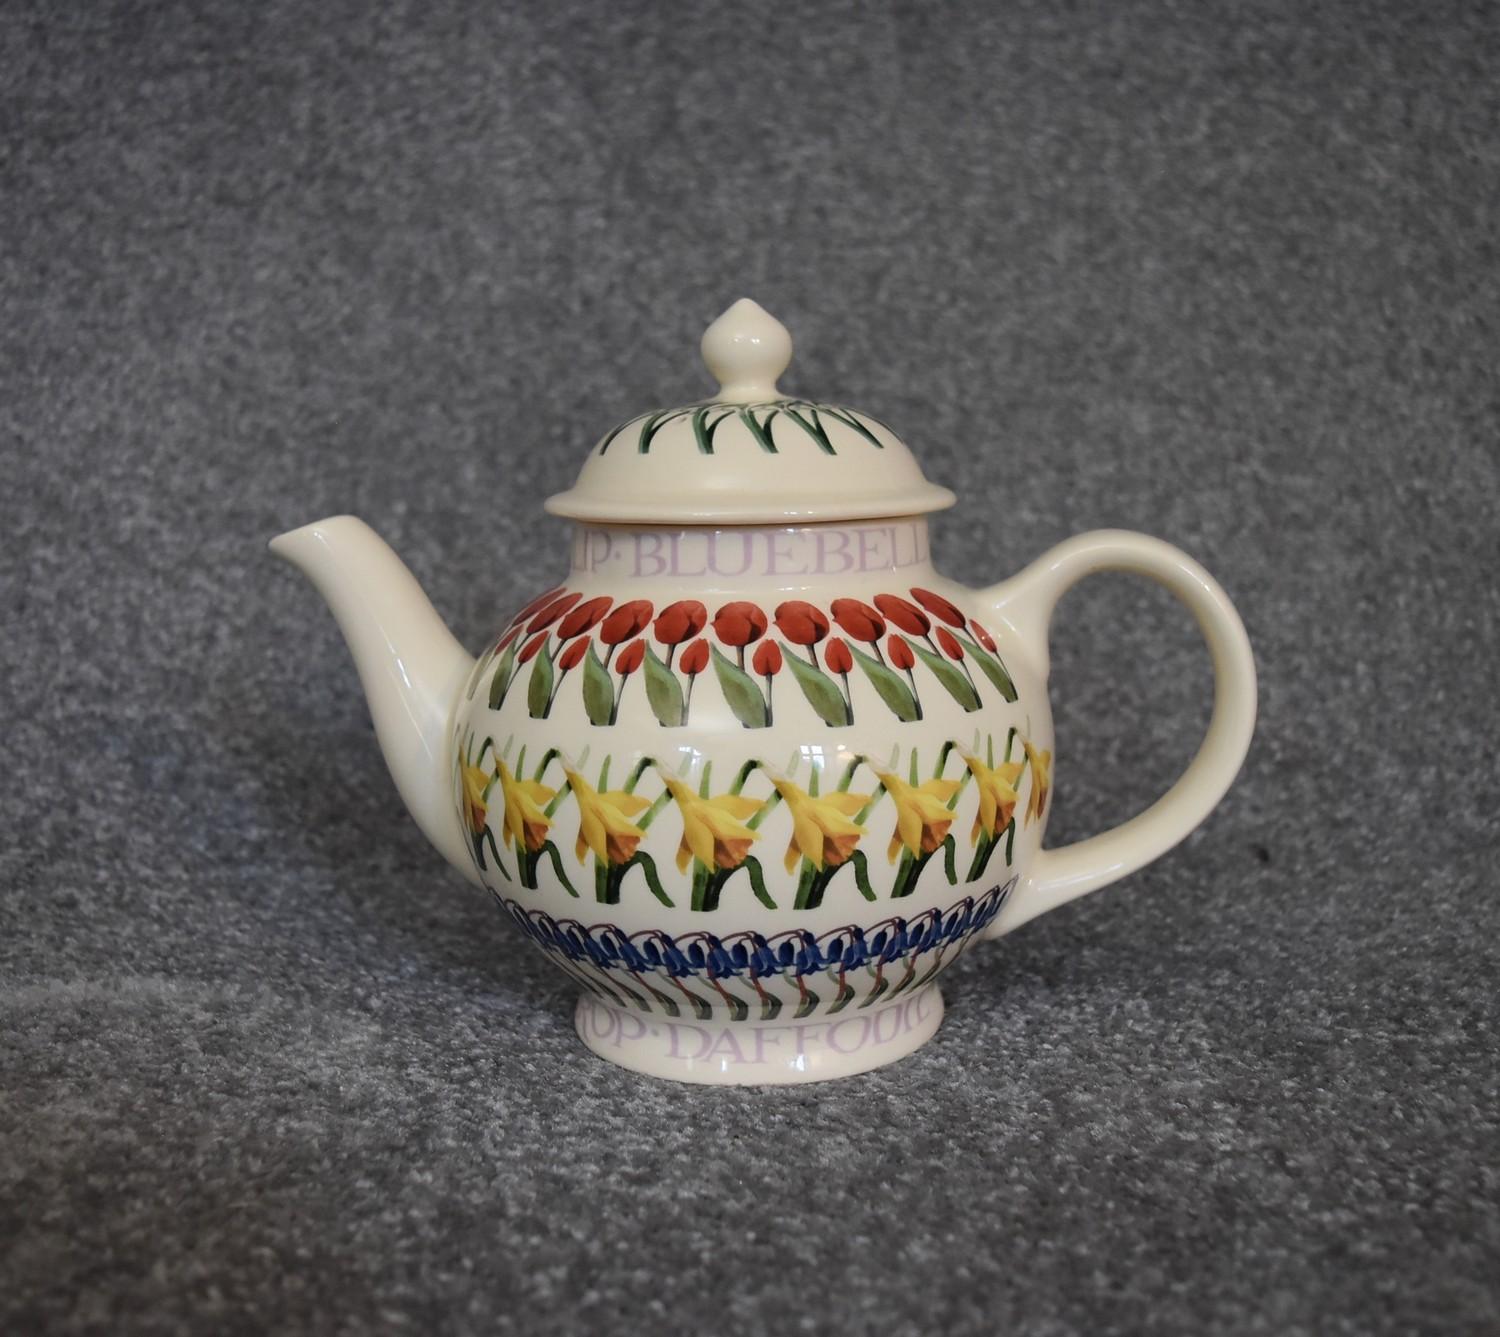 A 20th Century globular form teapot with floral design, by Emma Bridgwater. H22cm